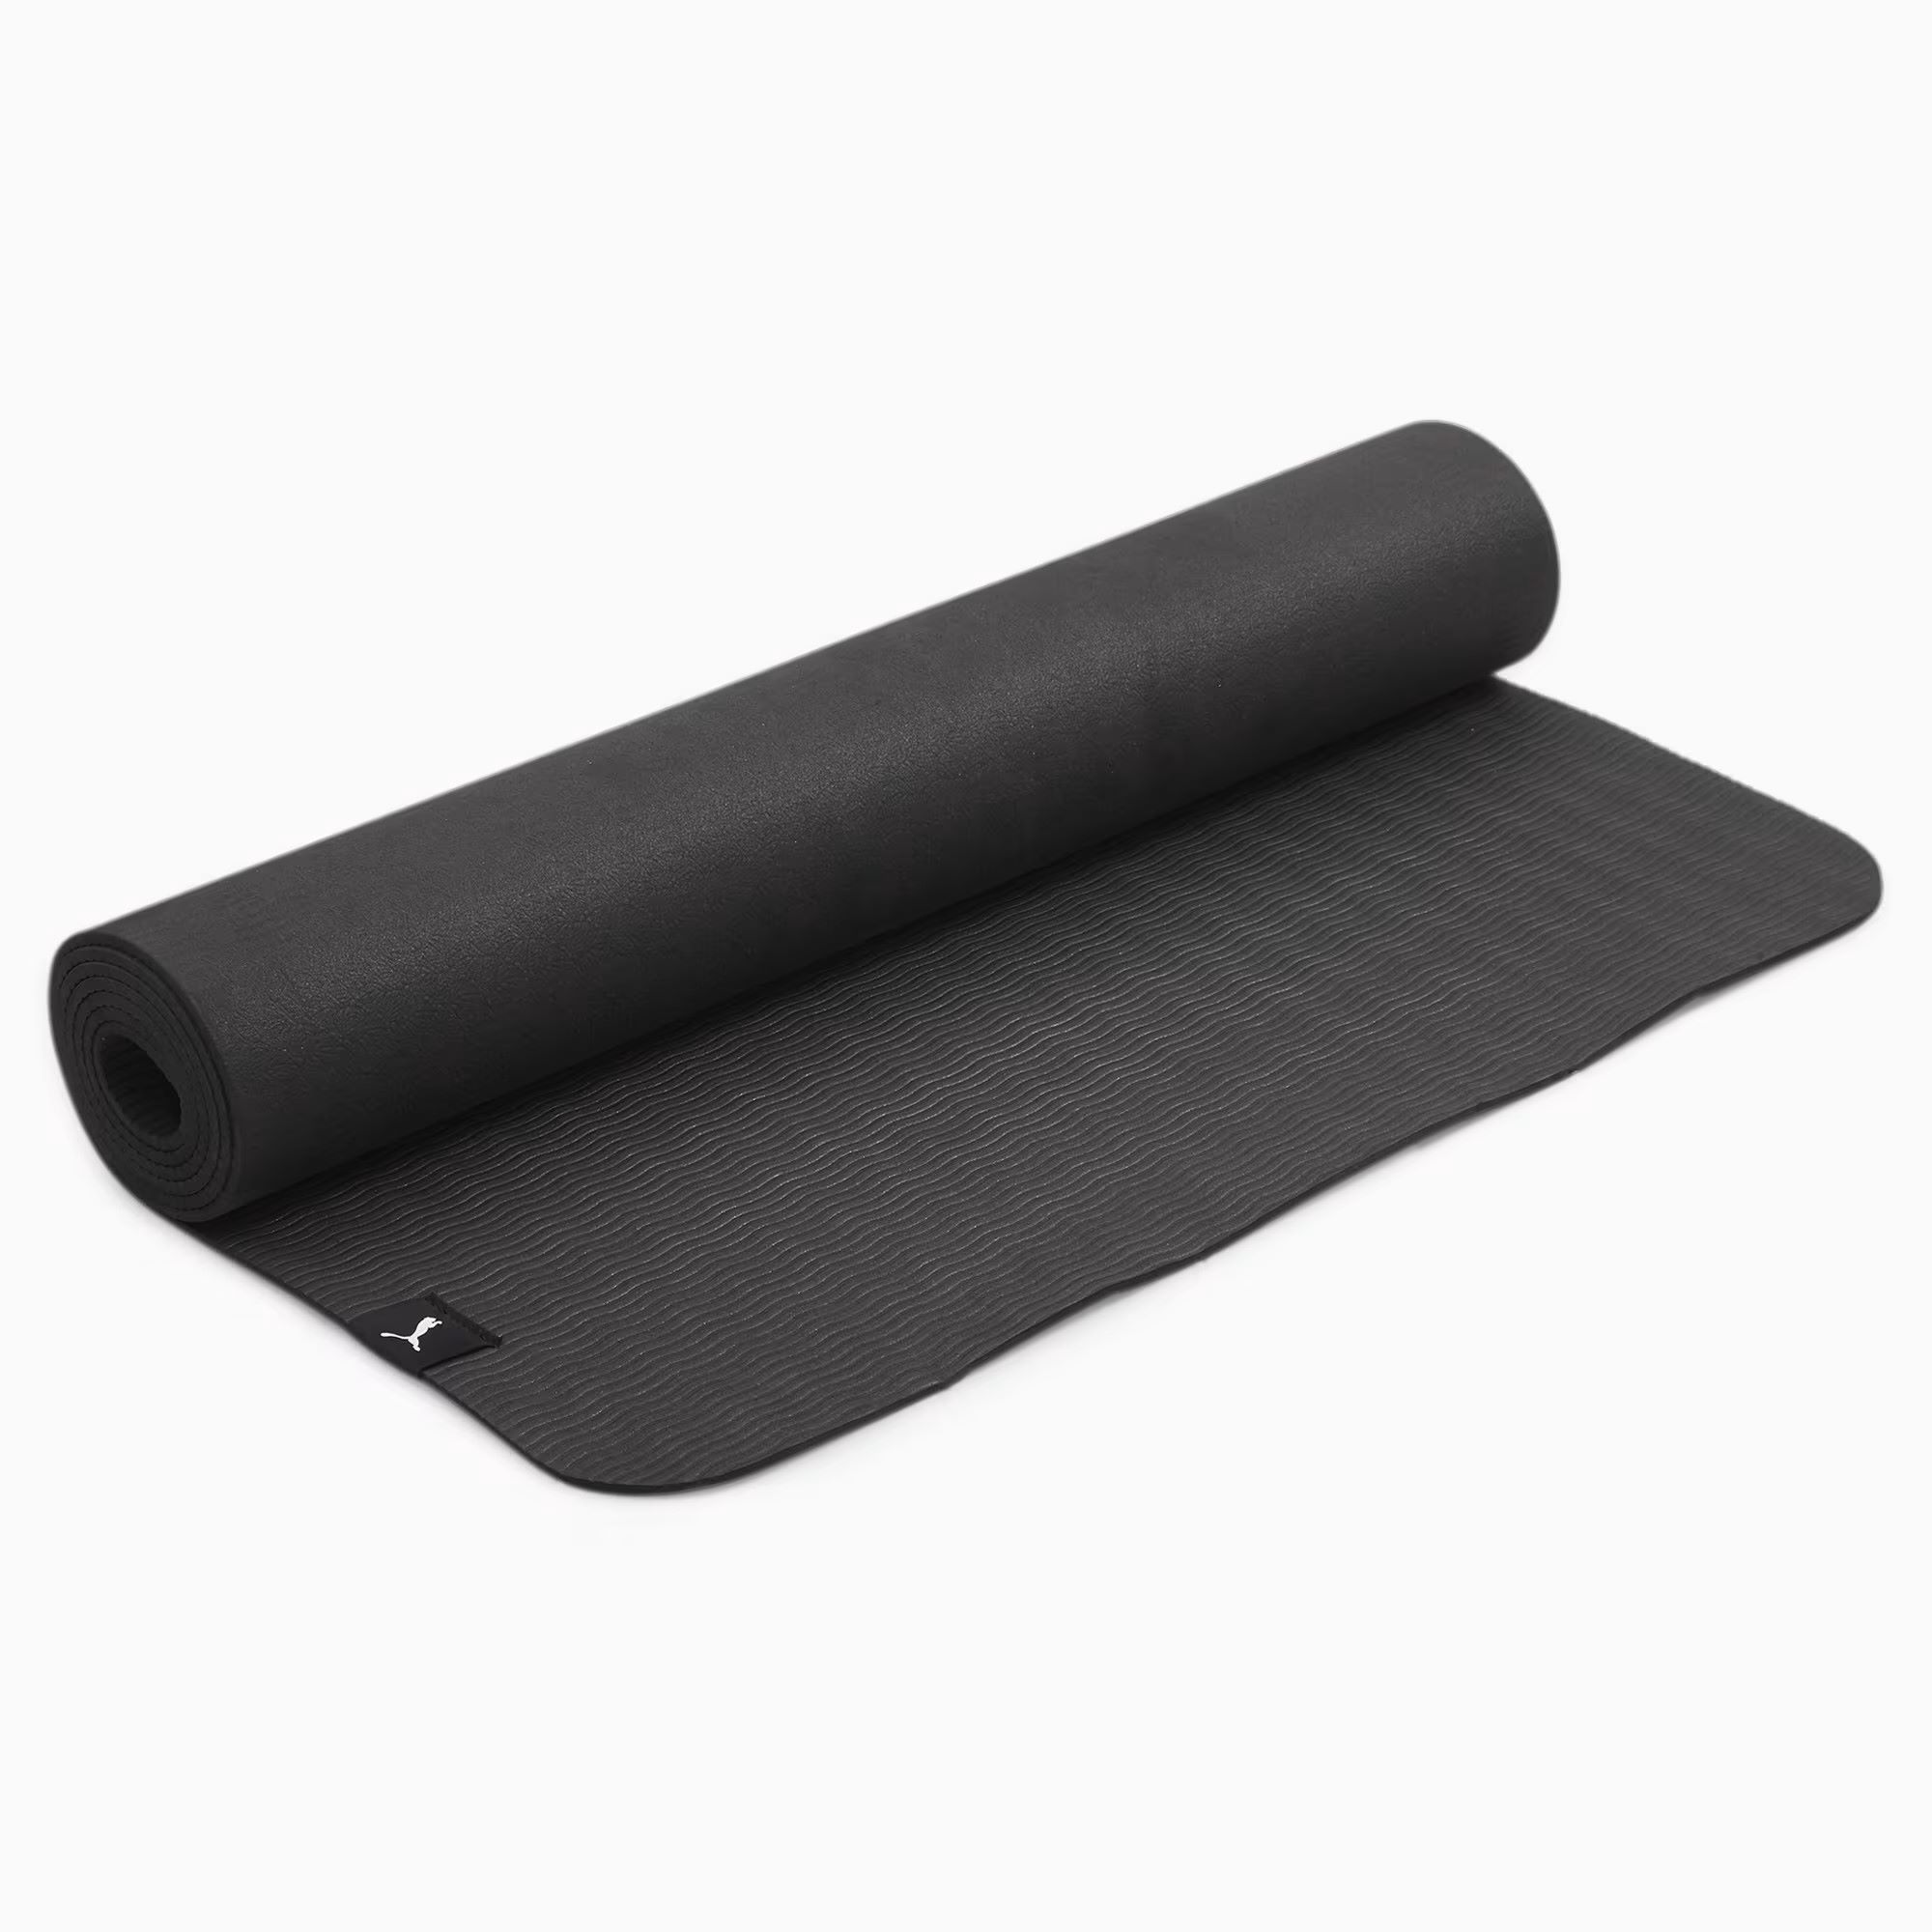 Fitness Mat Review: Find the Perfect Mat for Your Workout Routine